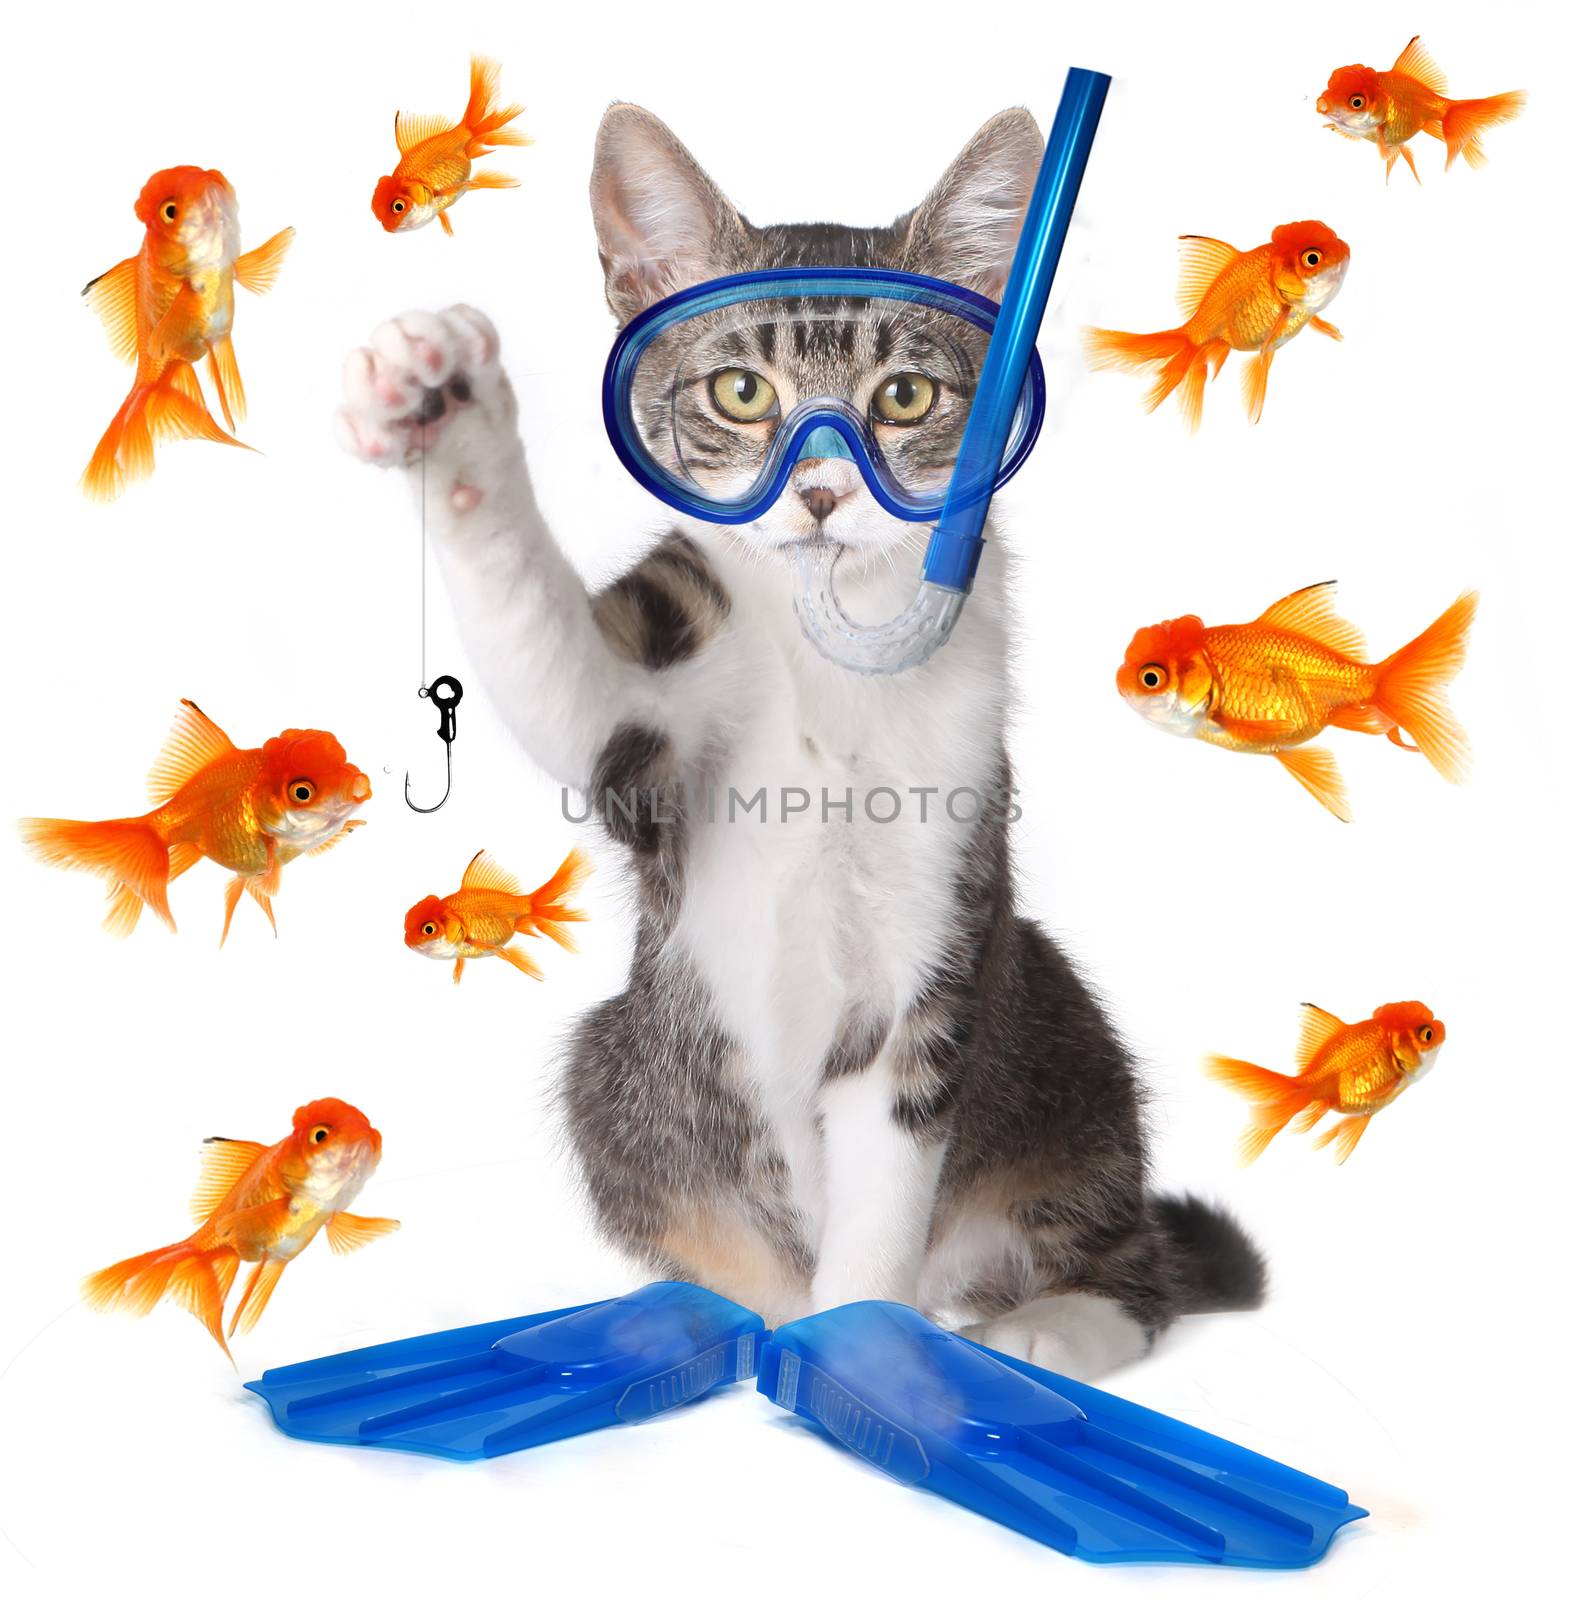 Funny Image of a Cat Fishing. Conceptually Analogous with the Te by tobkatrina